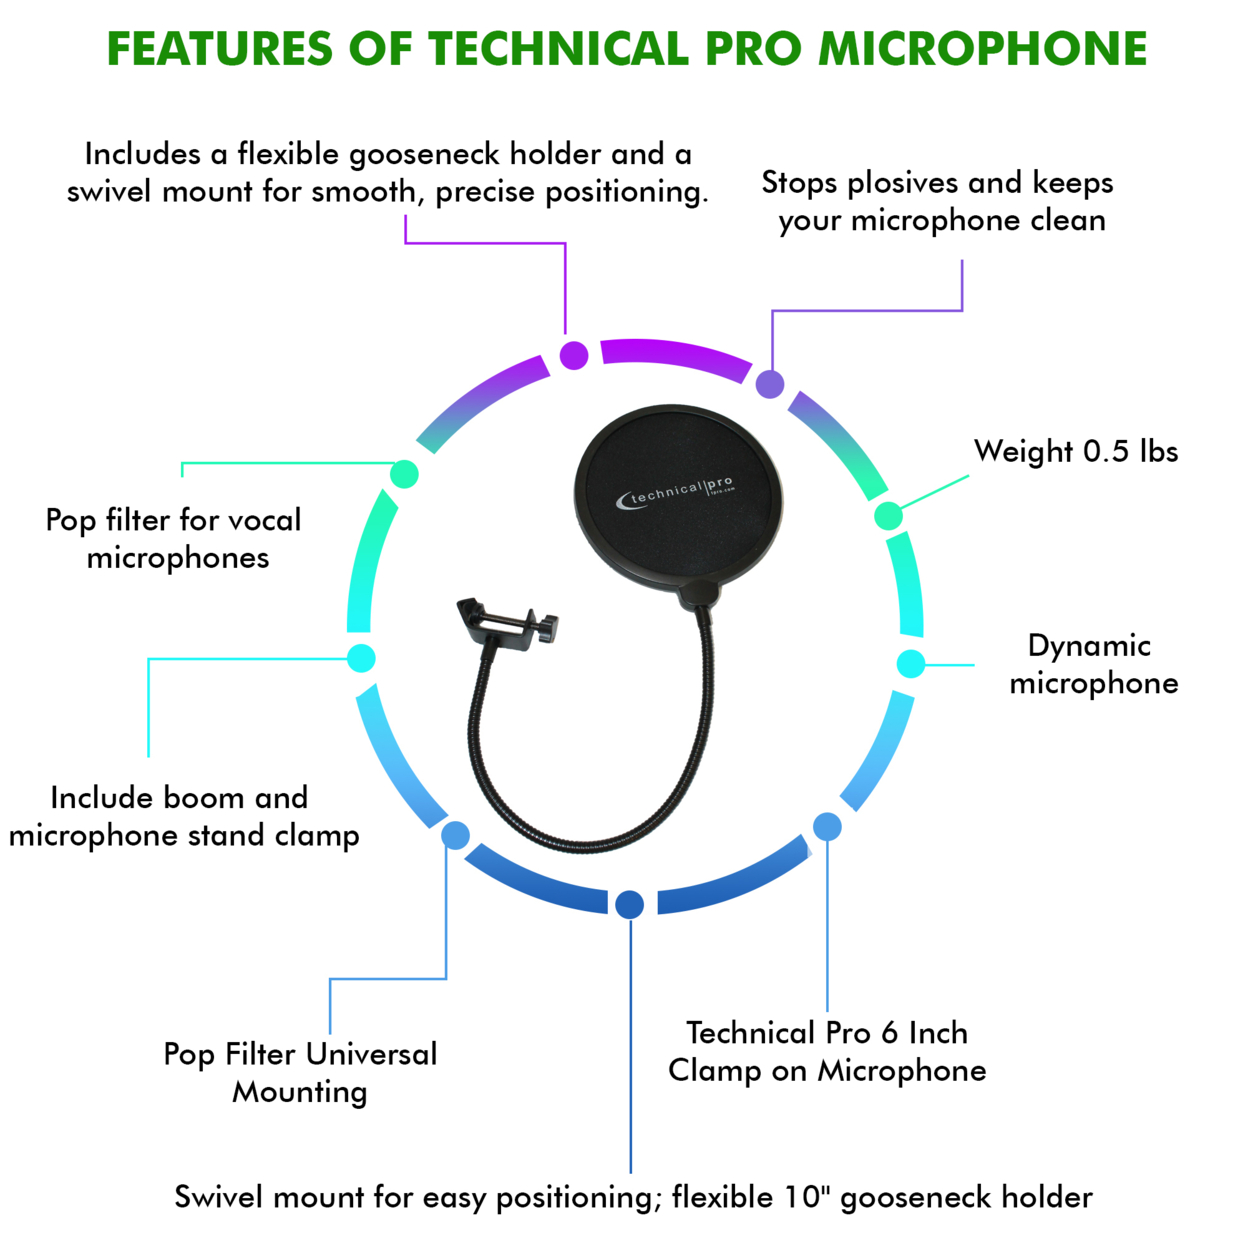 Technical Pro 6 Inch Clamp On Microphone Pop Filter Universal Mounting, Gooseneck Holder And Swivel Mount Included For Live Broadcasting